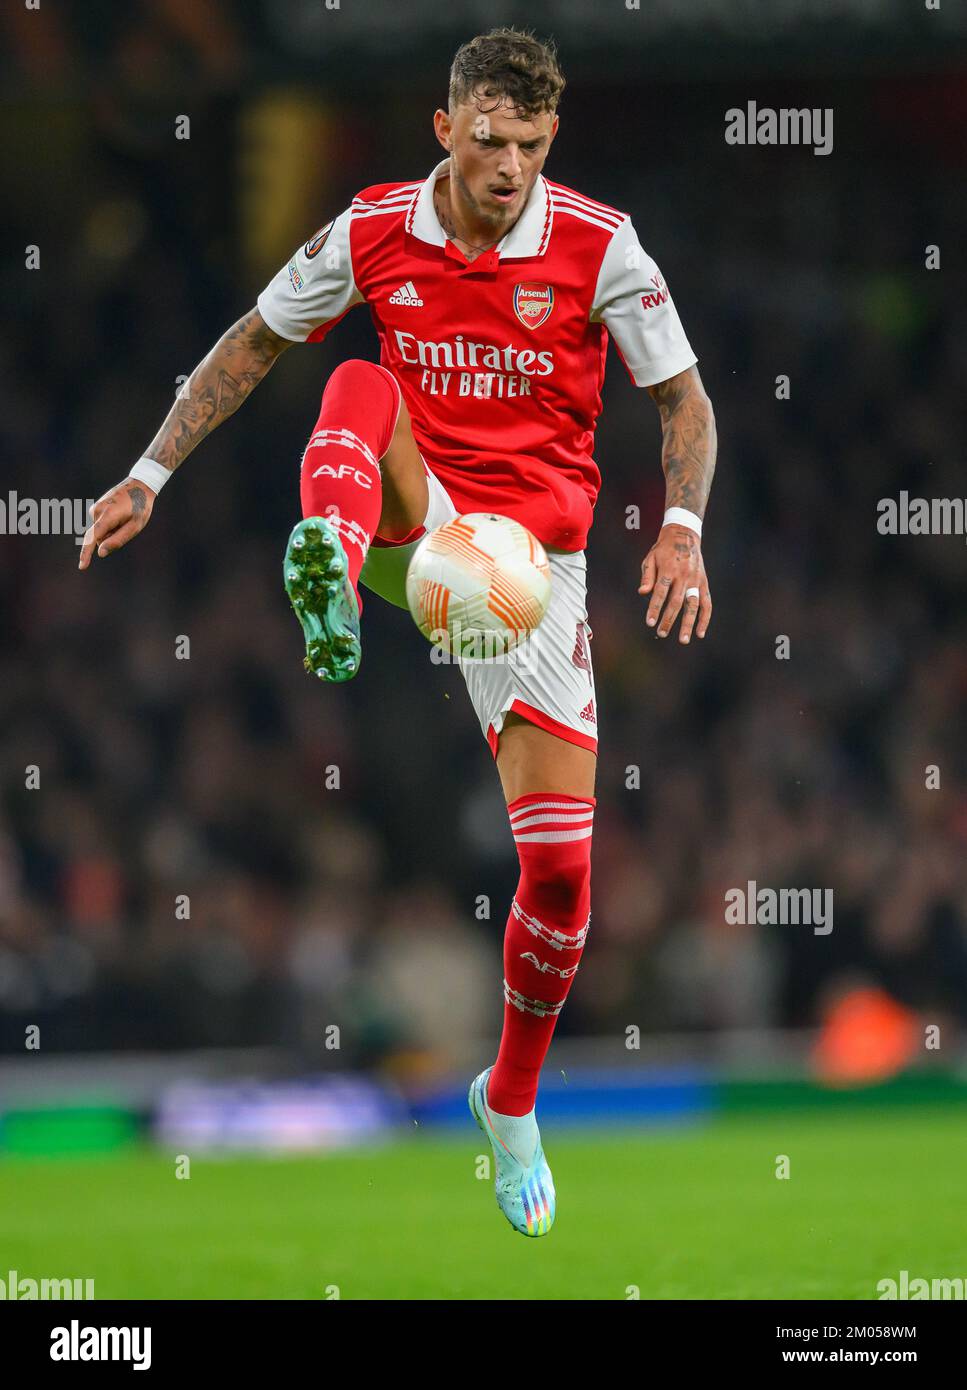 03 Nov 2022 - Arsenal v FC Zurich - UEFA Europa League - Group A - Emirates Stadium   Arsenal's Ben White during the match against FC Zurich Picture : Mark Pain / Alamy Stock Photo